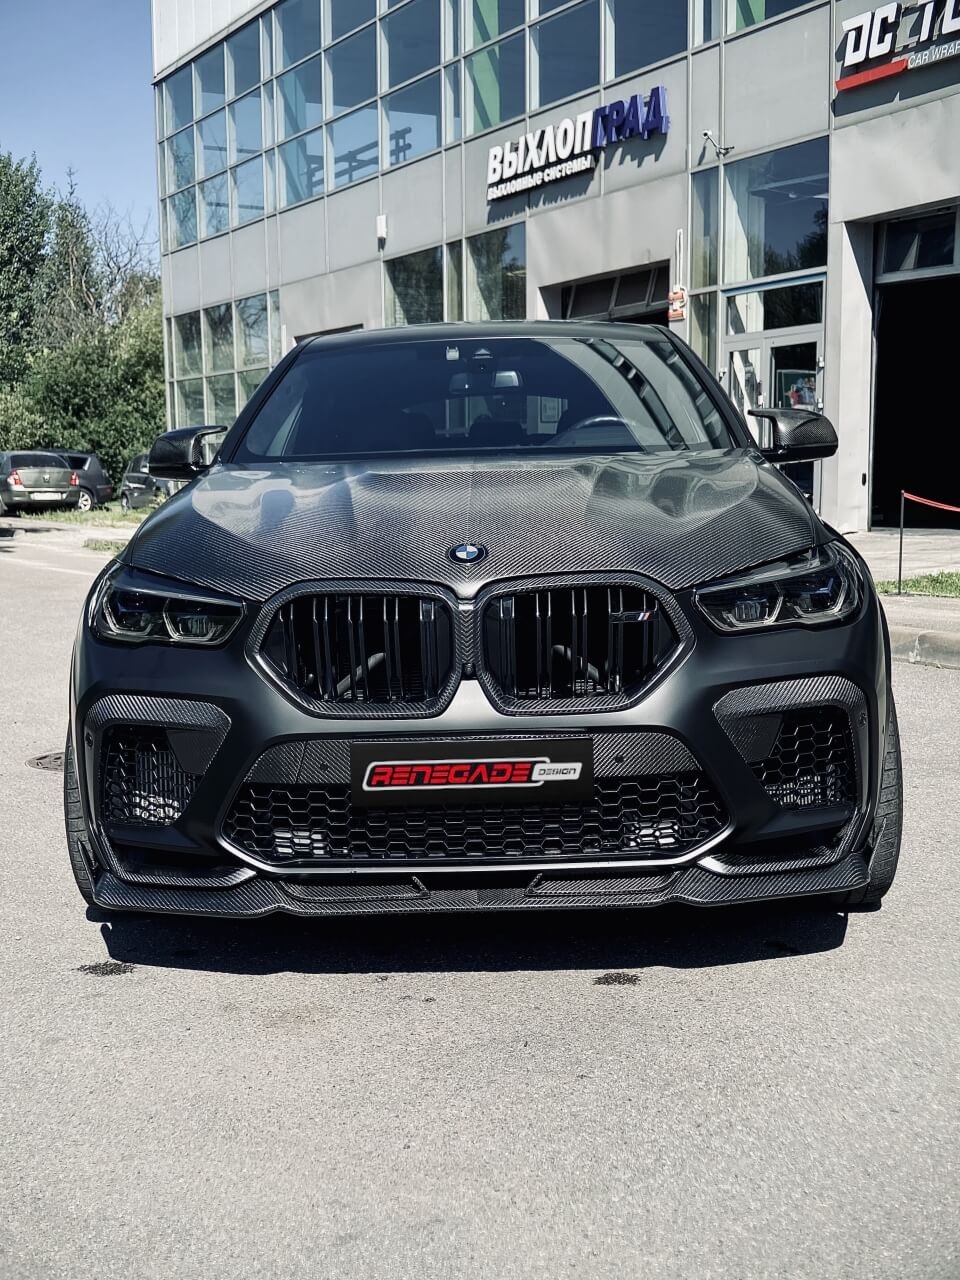 Renegade Design body kit for BMW X6 M F96 Buy with delivery, installation,  affordable price and guarantee